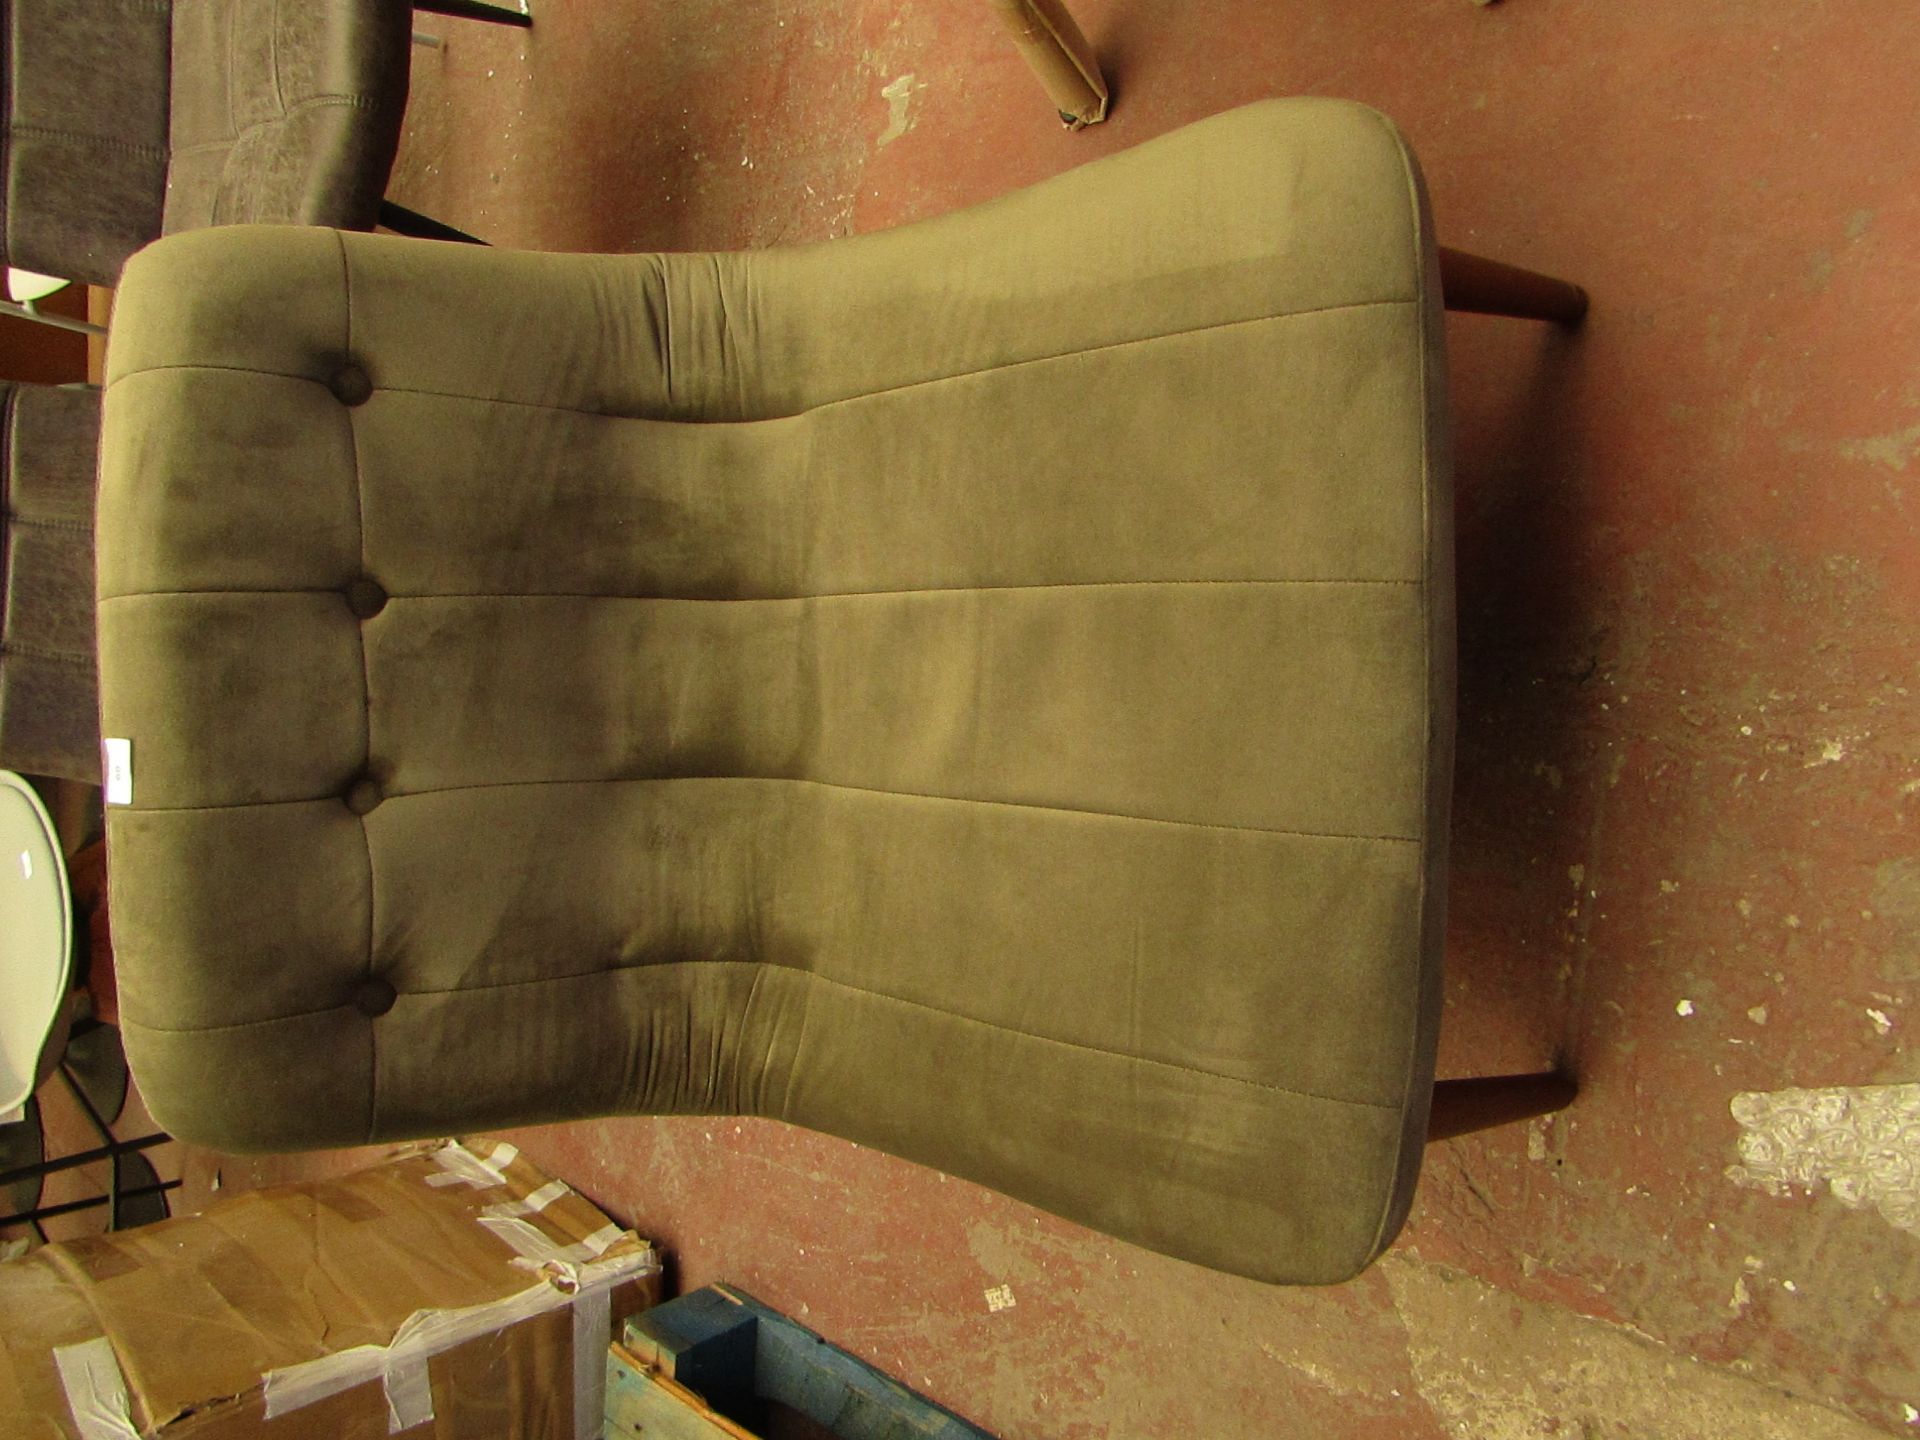 | 1X | MADE.COM HALBERT ACCENT ARMCHAIR, SYCAMORE GREEN VELVET | LOOKS IN VERY GOOD CONDITION (